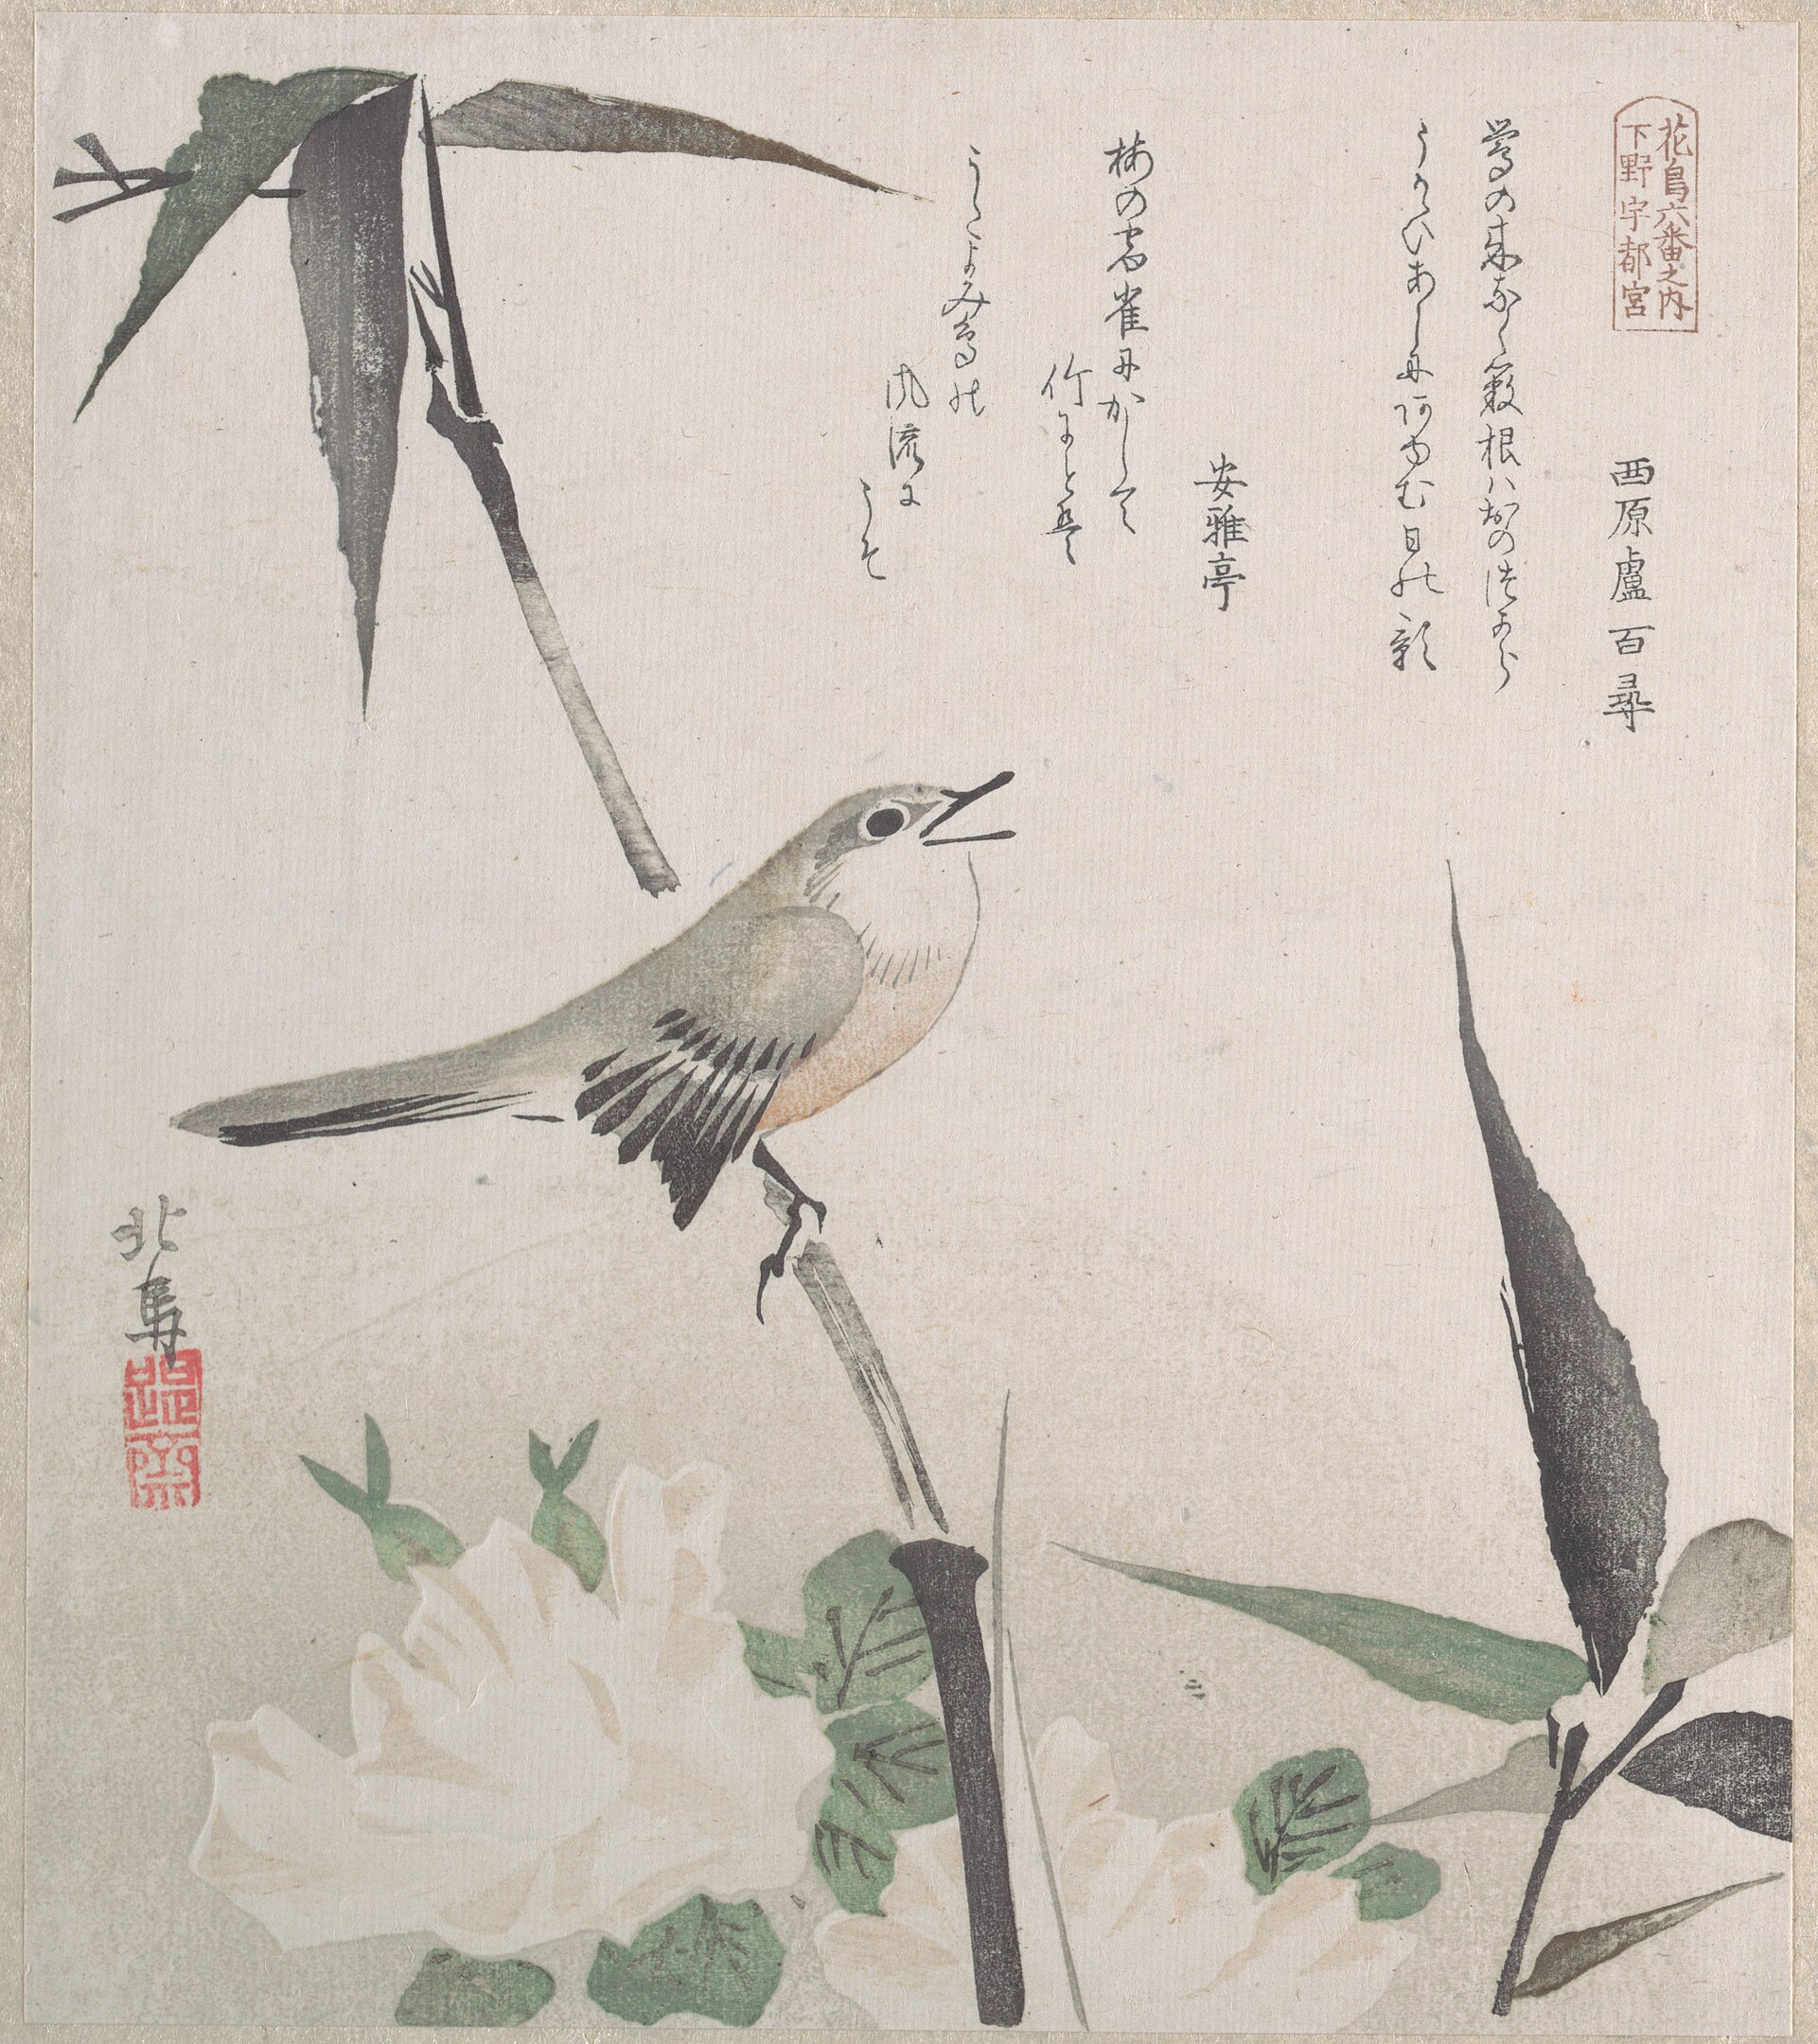 A small bird perched on bamboo